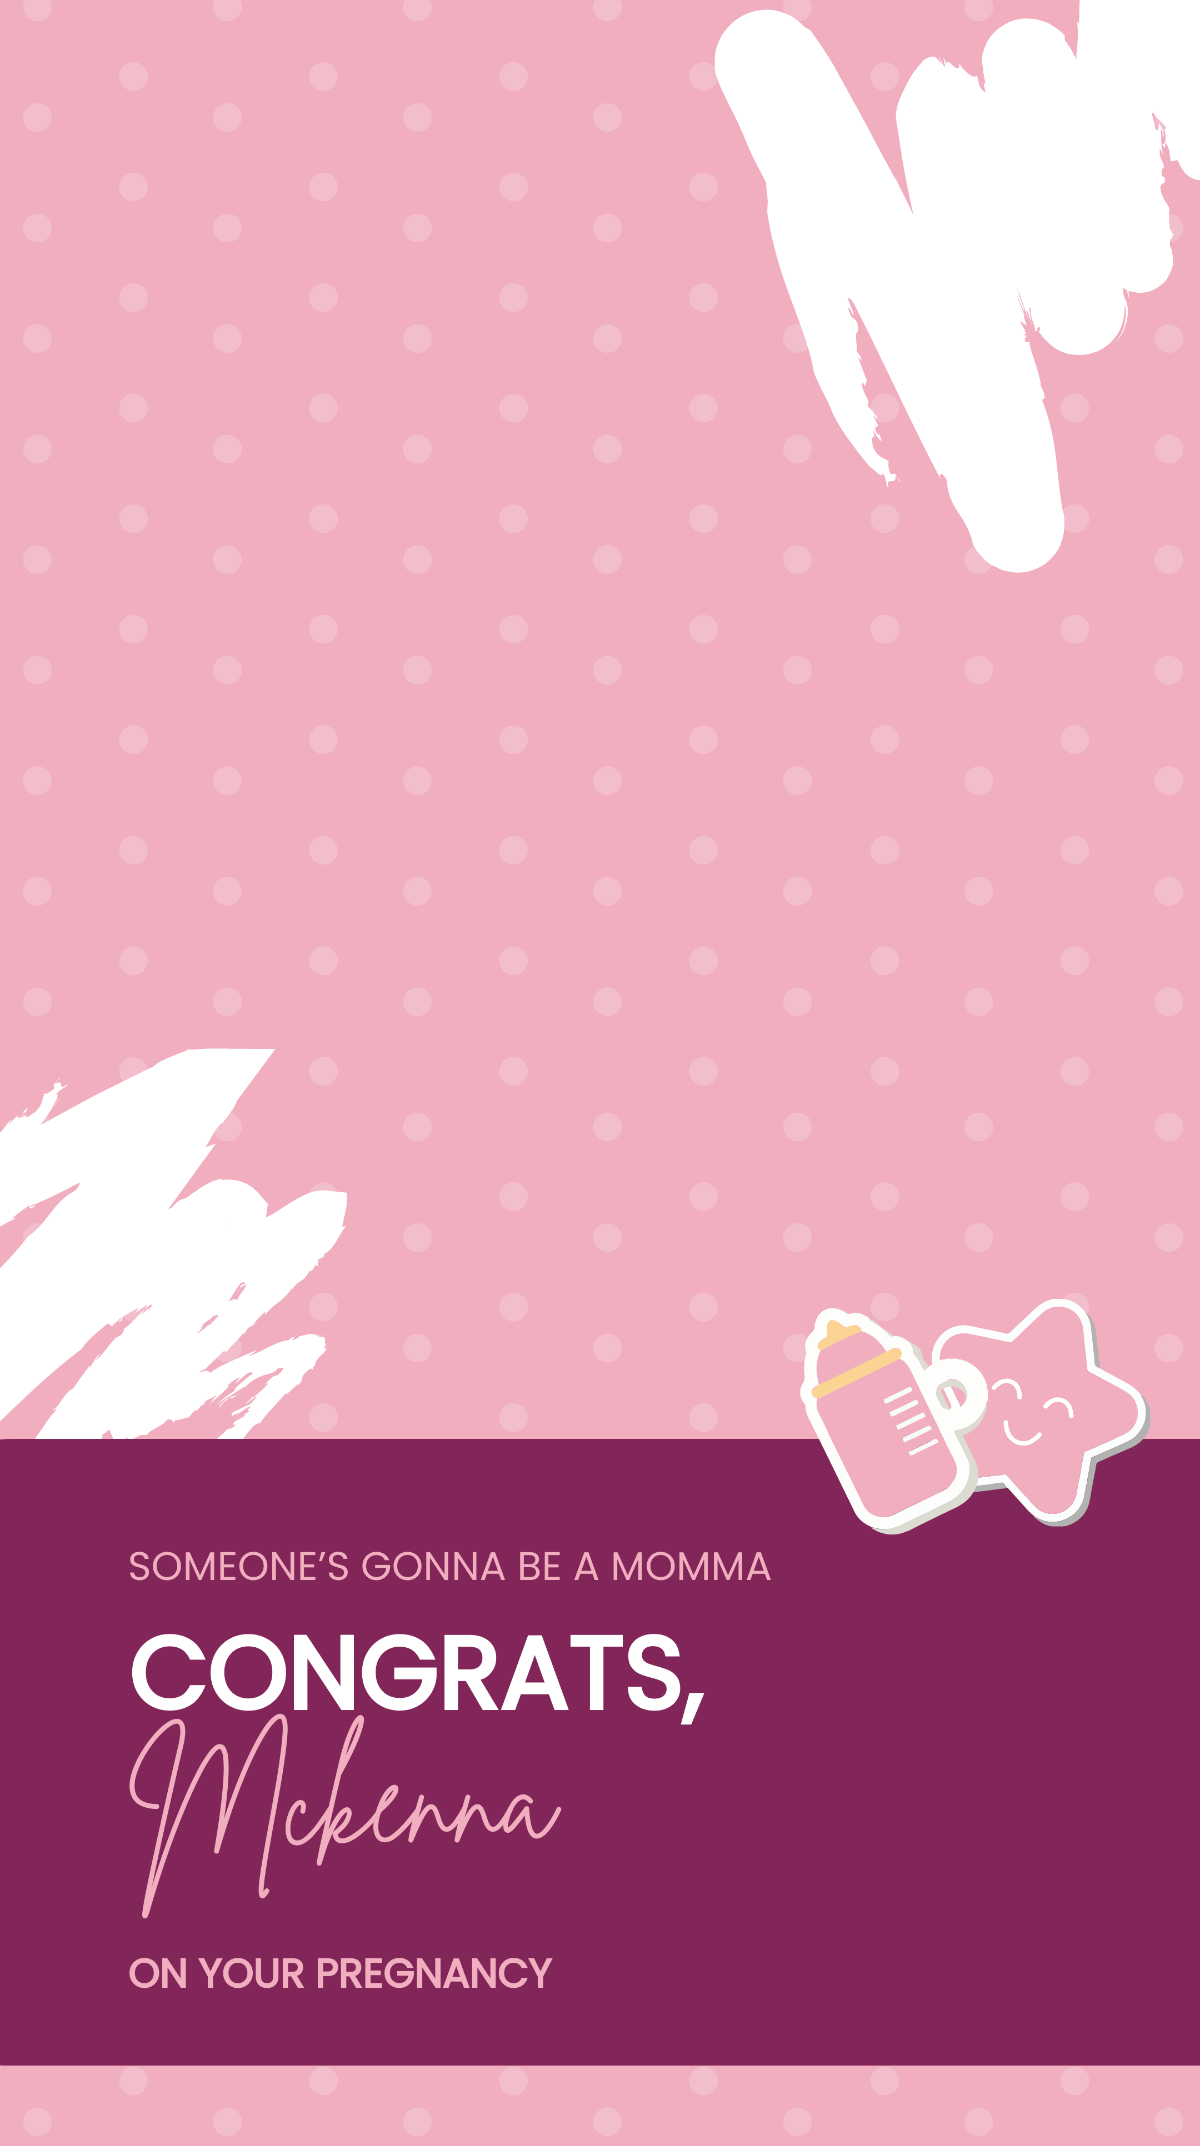 Free Pregnancy Announcement Snapchat Geofilter Template